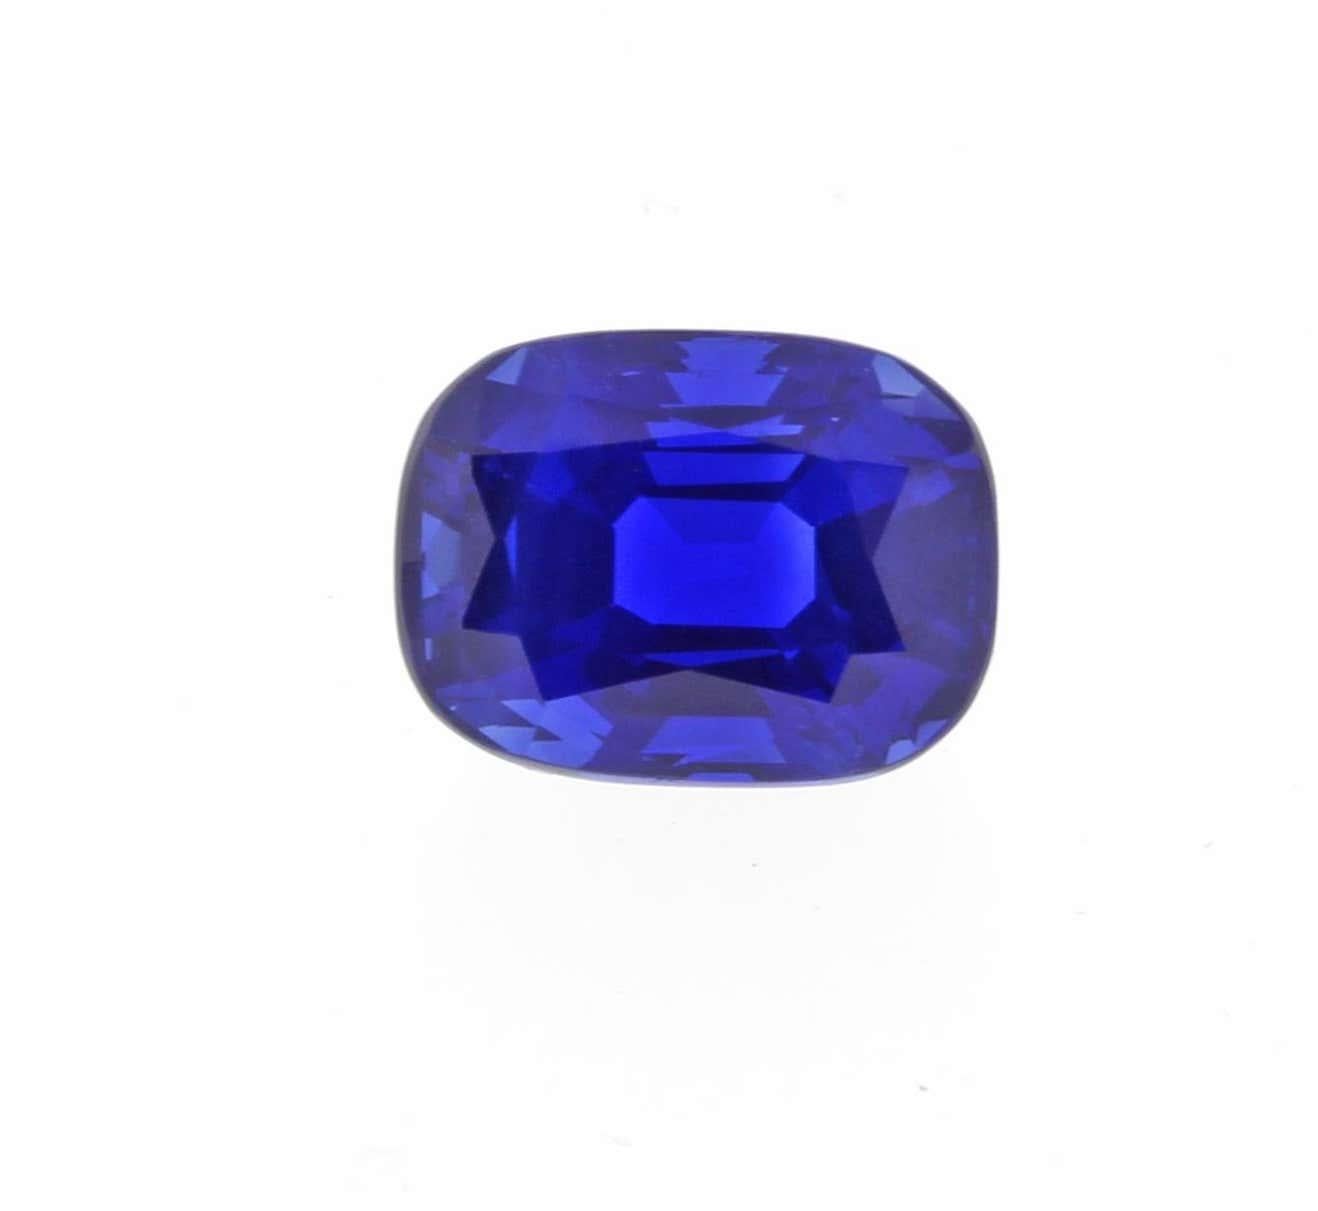 From Pampillonia Jewelers a rare 5.75 carat Kashmir sapphire and diamond ring The sapphire is certified by both A.G.L and Gubelin to be of natural origin from Kashmir with no evidence of heat. The ring is set in platinum with two trilliant cut